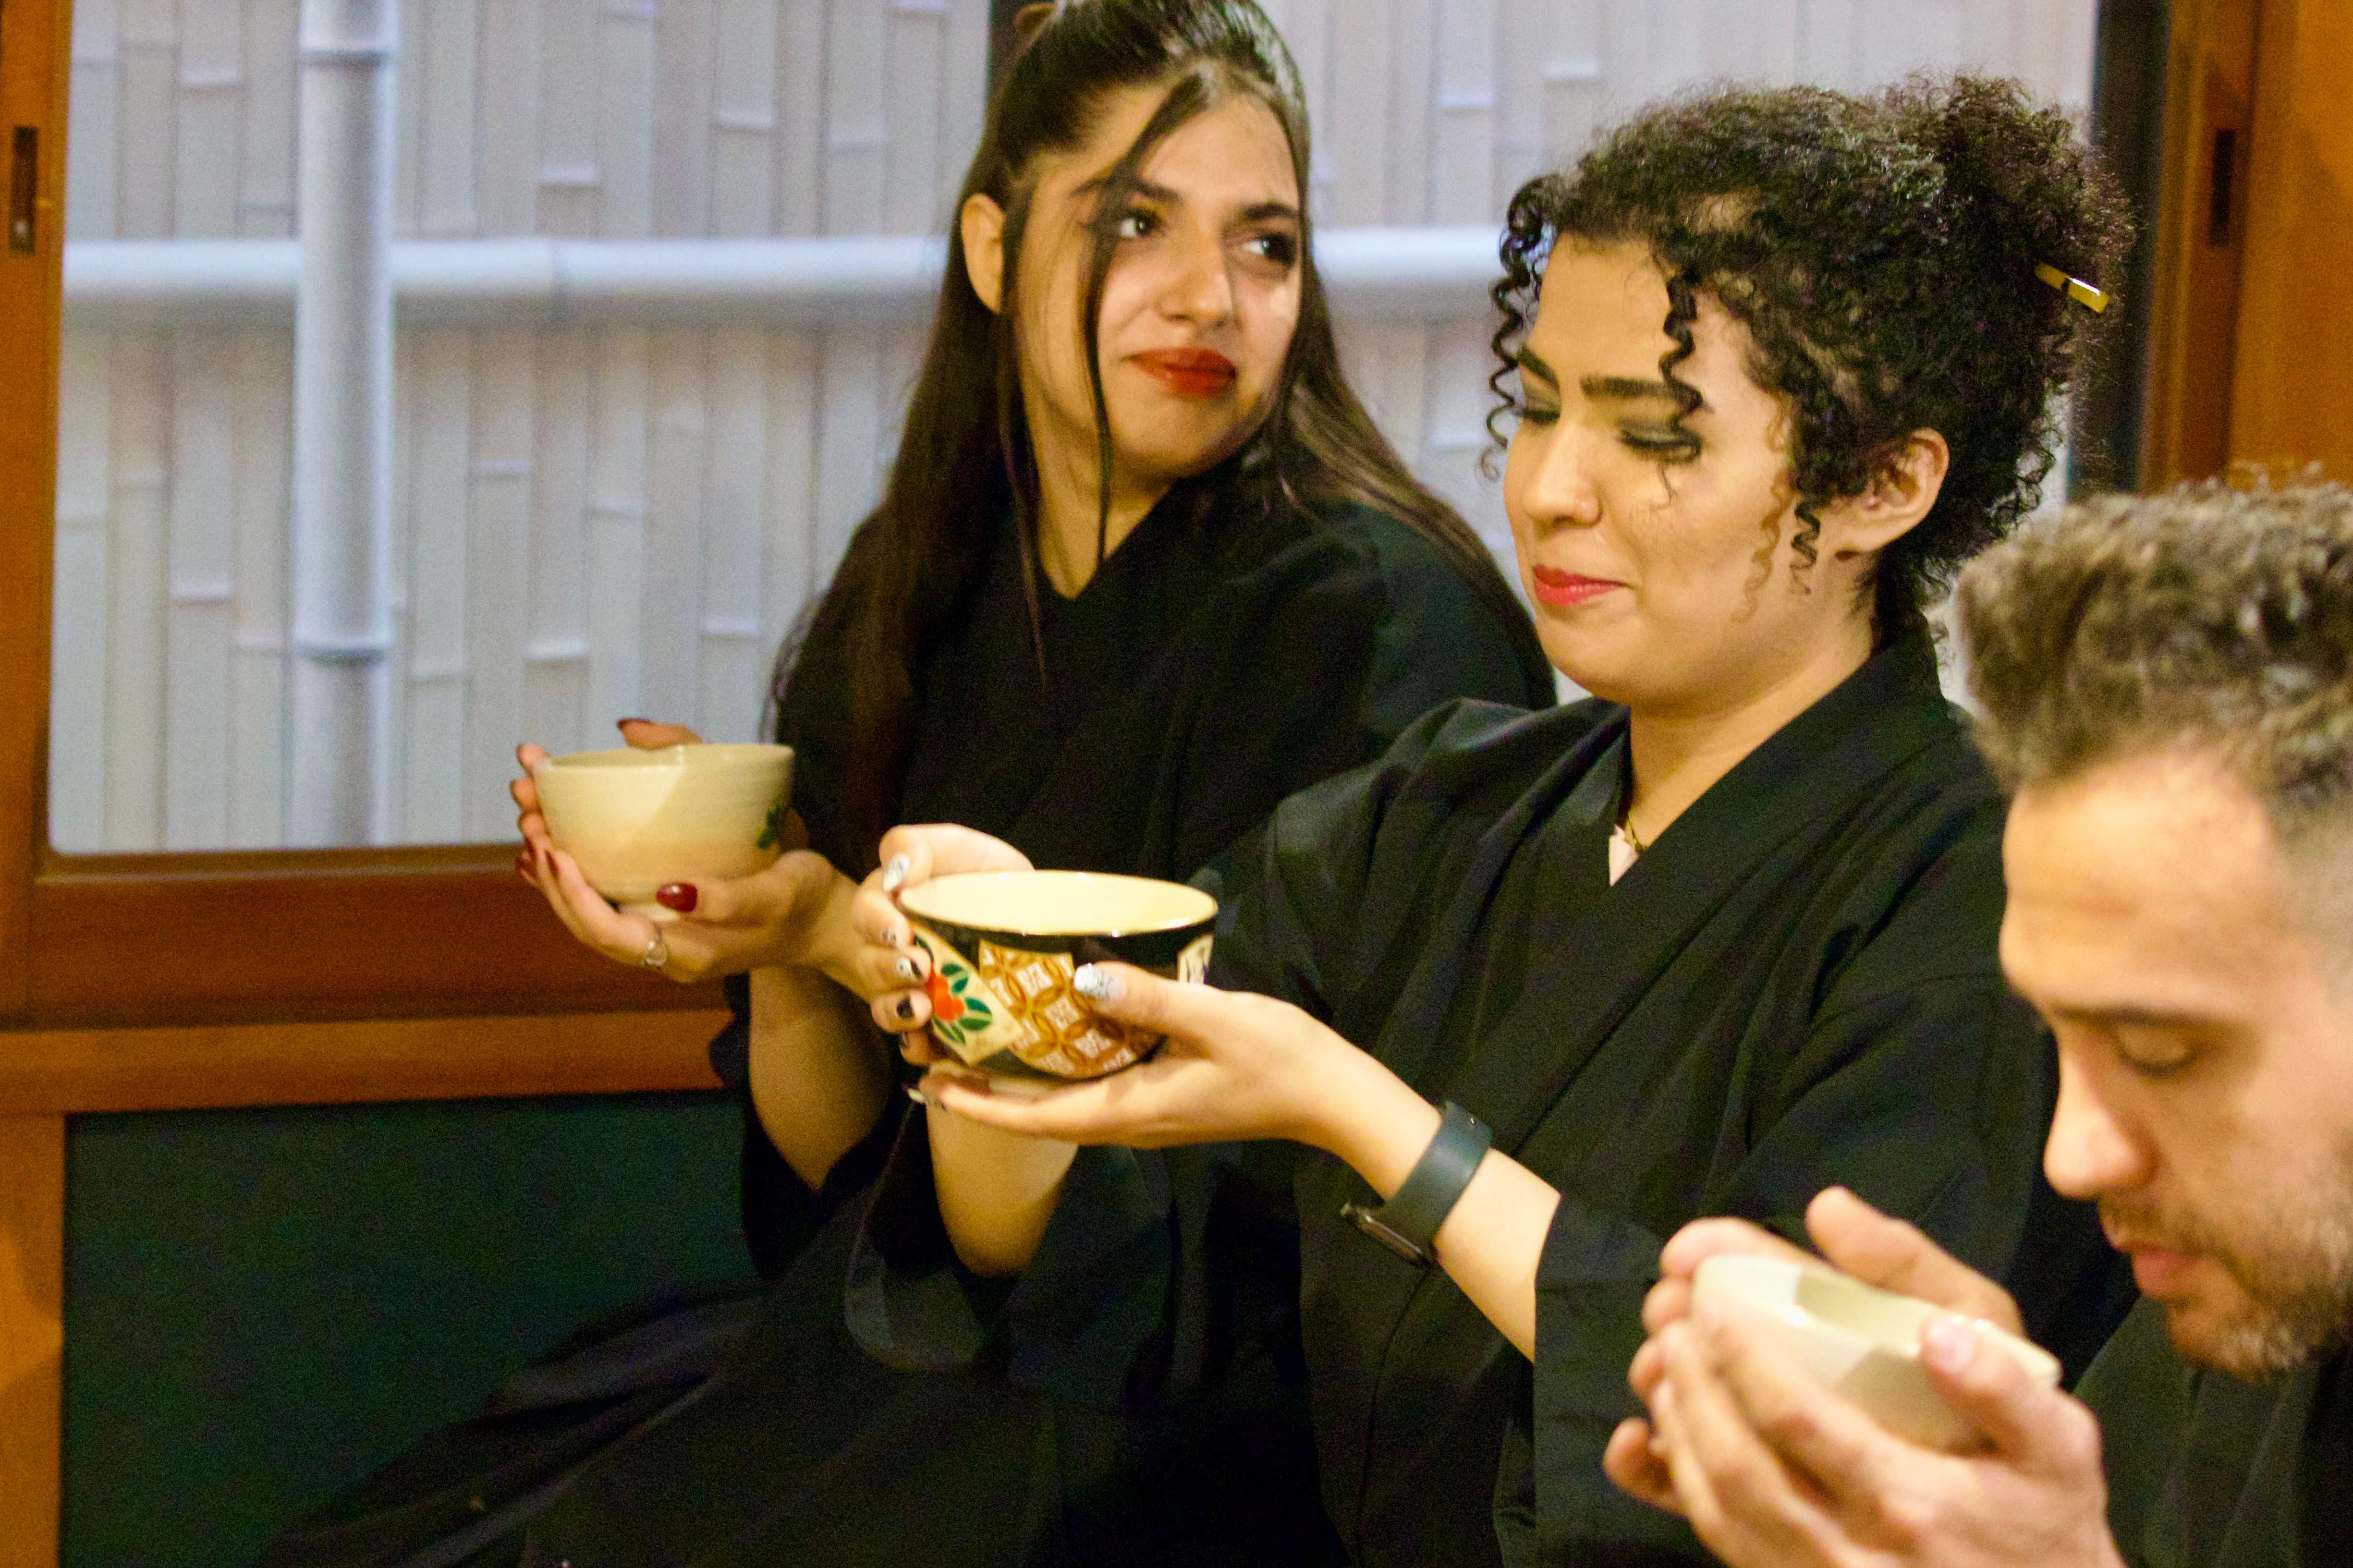 Experience Tea Ceremony while wearing a private kimono in Asakusa. Includes portrait shooting with a single-lens reflex camera